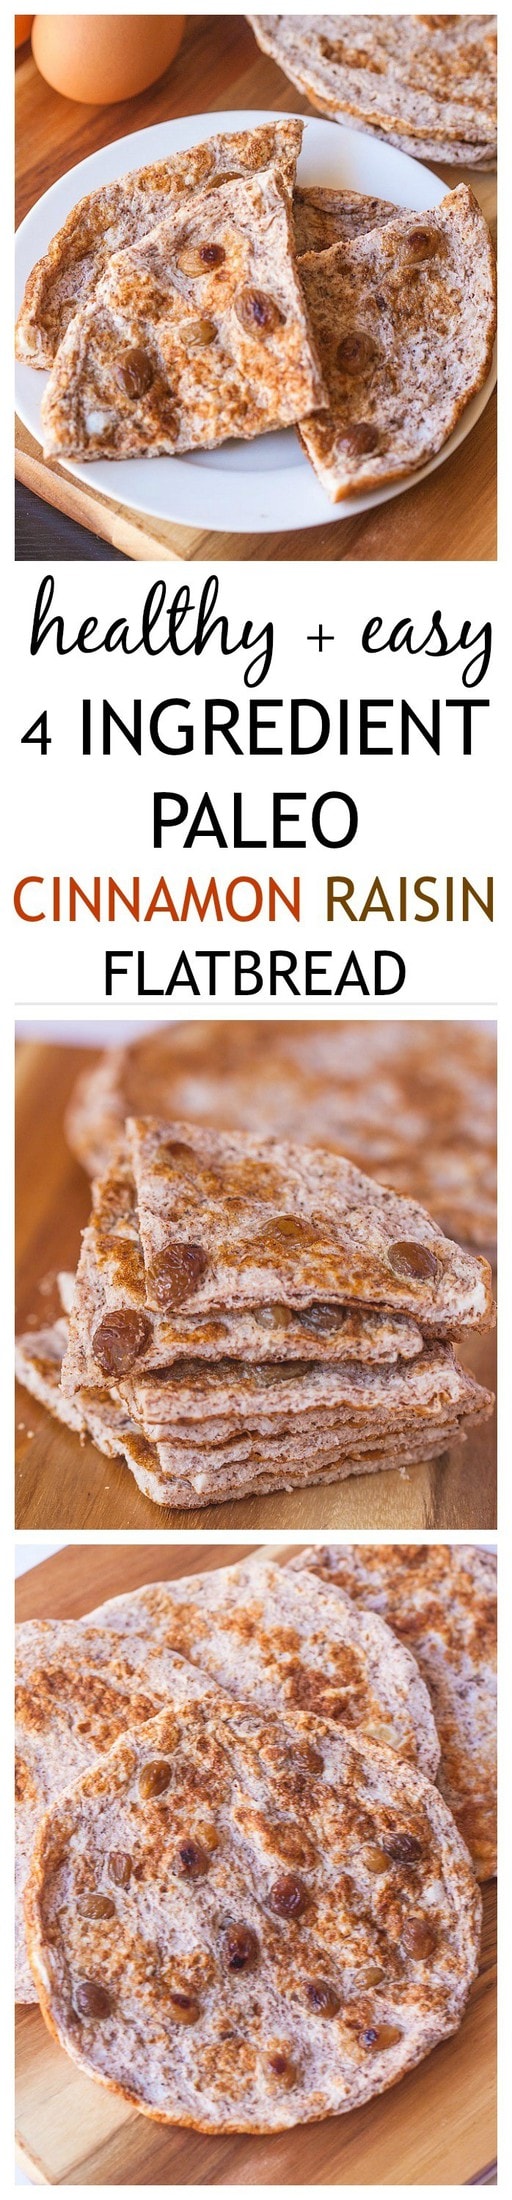 Easy 4 Ingredient Paleo Cinnamon Raisin Flatbread- Just five ingredients and five minutes are needed to make this simple Paleo Cinnamon Raisin Flatbread- Very high in protein, low in carbohydrates and perfect with a generous spread of butter! Gluten and refined sugar free! @thebigmansworld - thebigmansworld.com